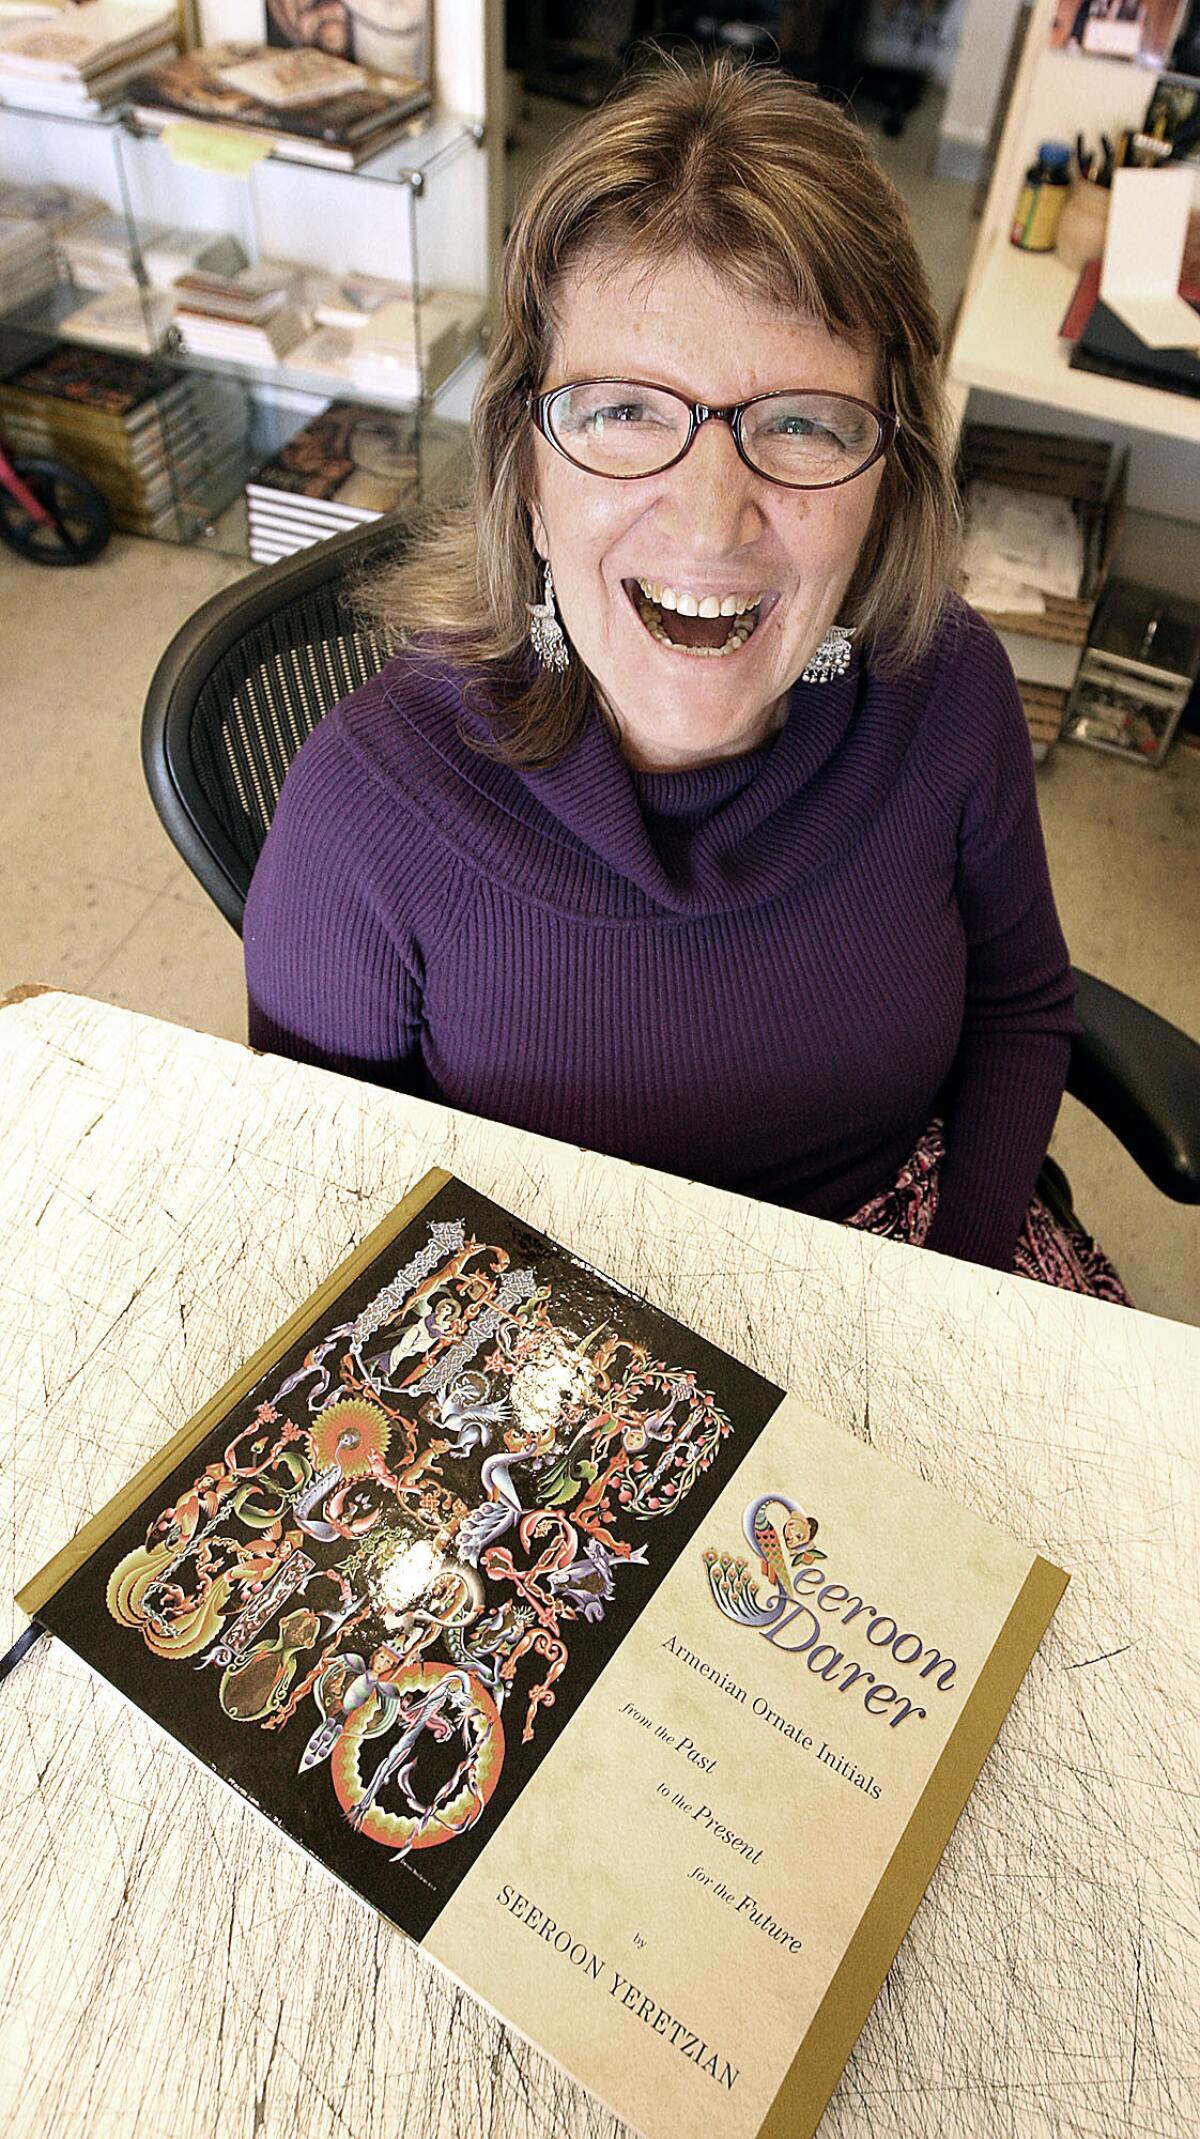 Seeroon Yeretzian, owner of Rosslin Gallery in Glendale, and her new book featuring ornate Armenian letters.